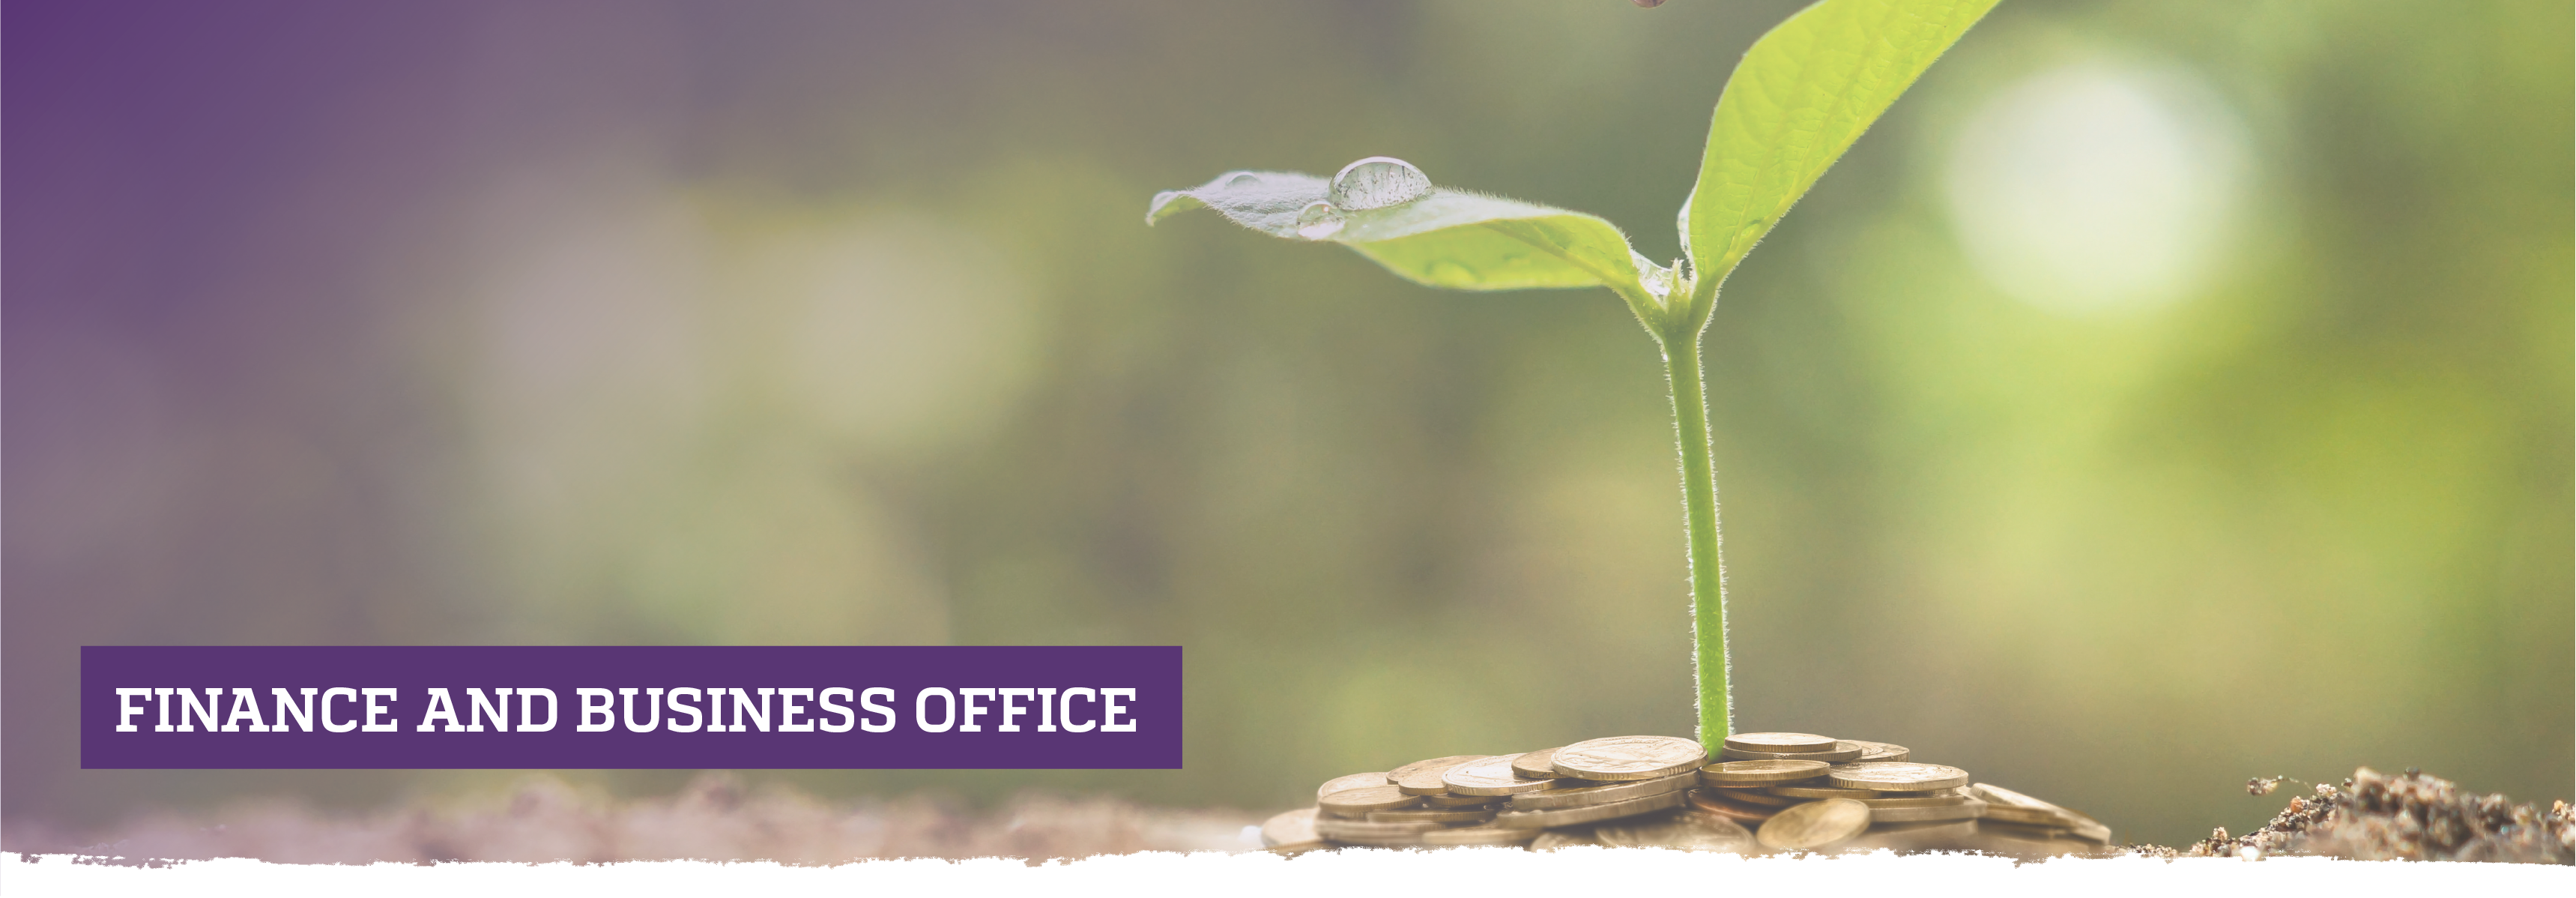 Plant growing out of pile of coins; Finance and Business Office